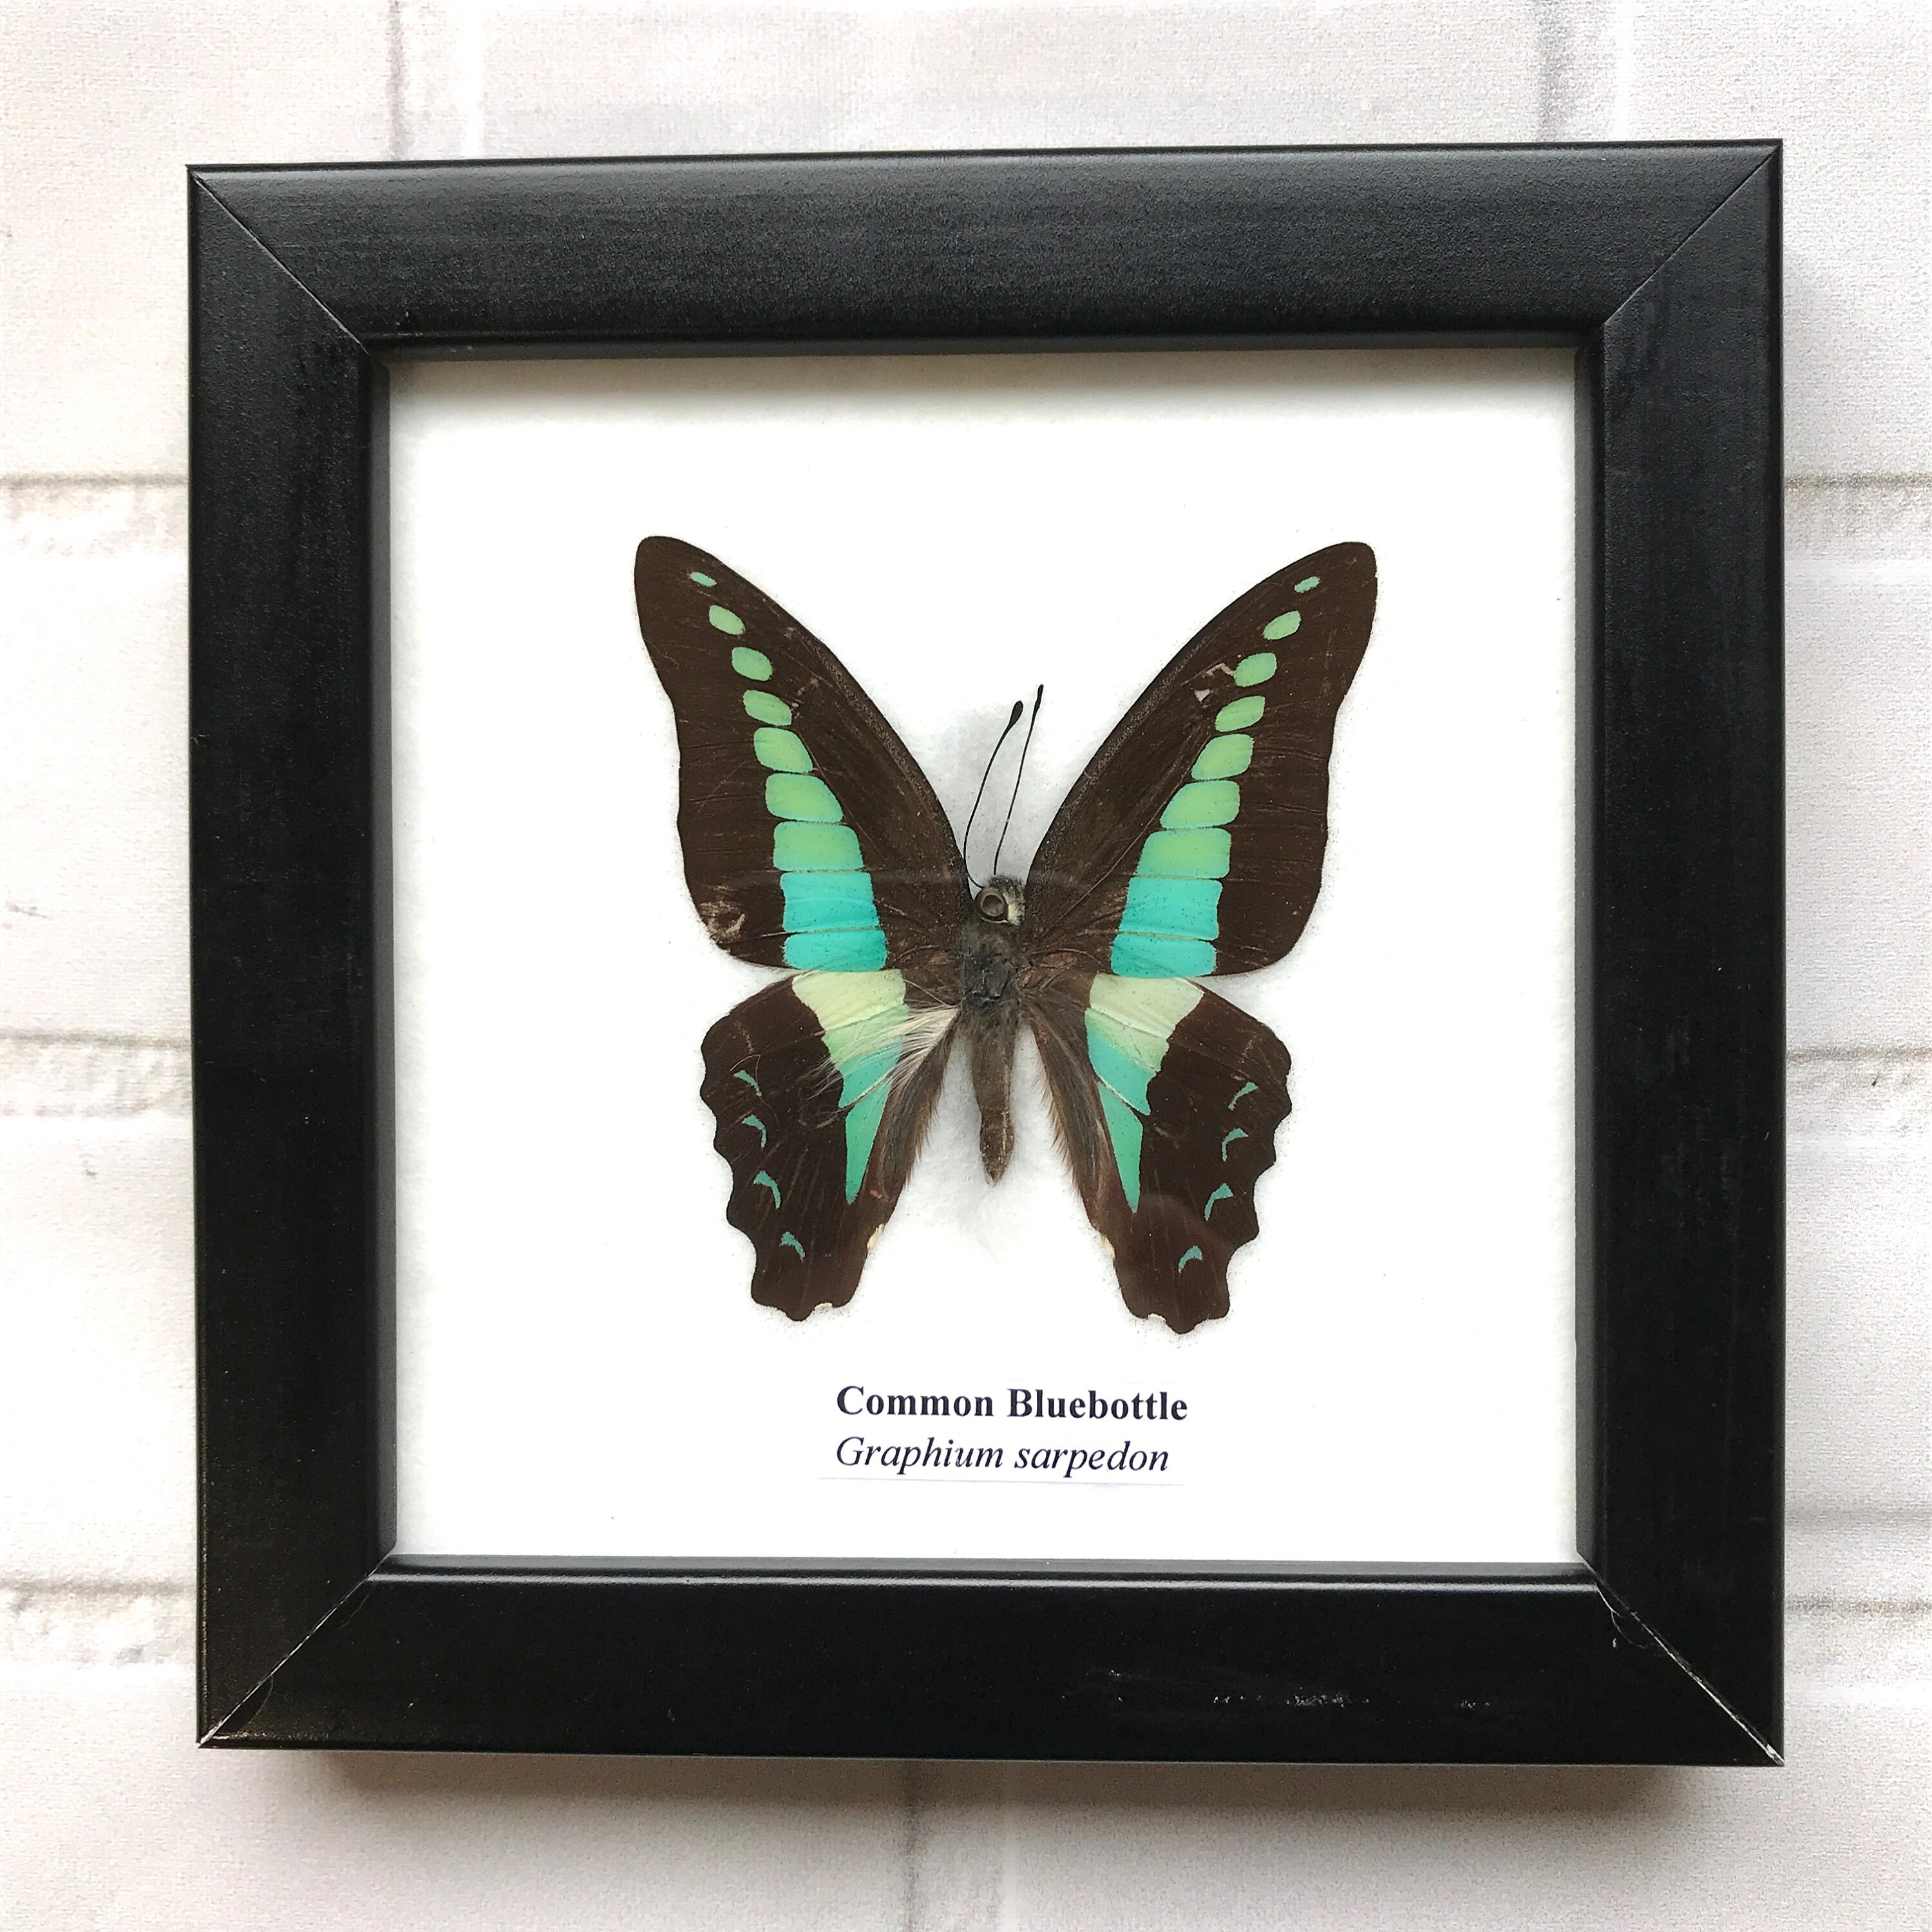 Real butterfly shadowbox frame Real Butterfly Butterfly Decor Framed Butterfly Graphium Sarpedon Butterfly Framed Art